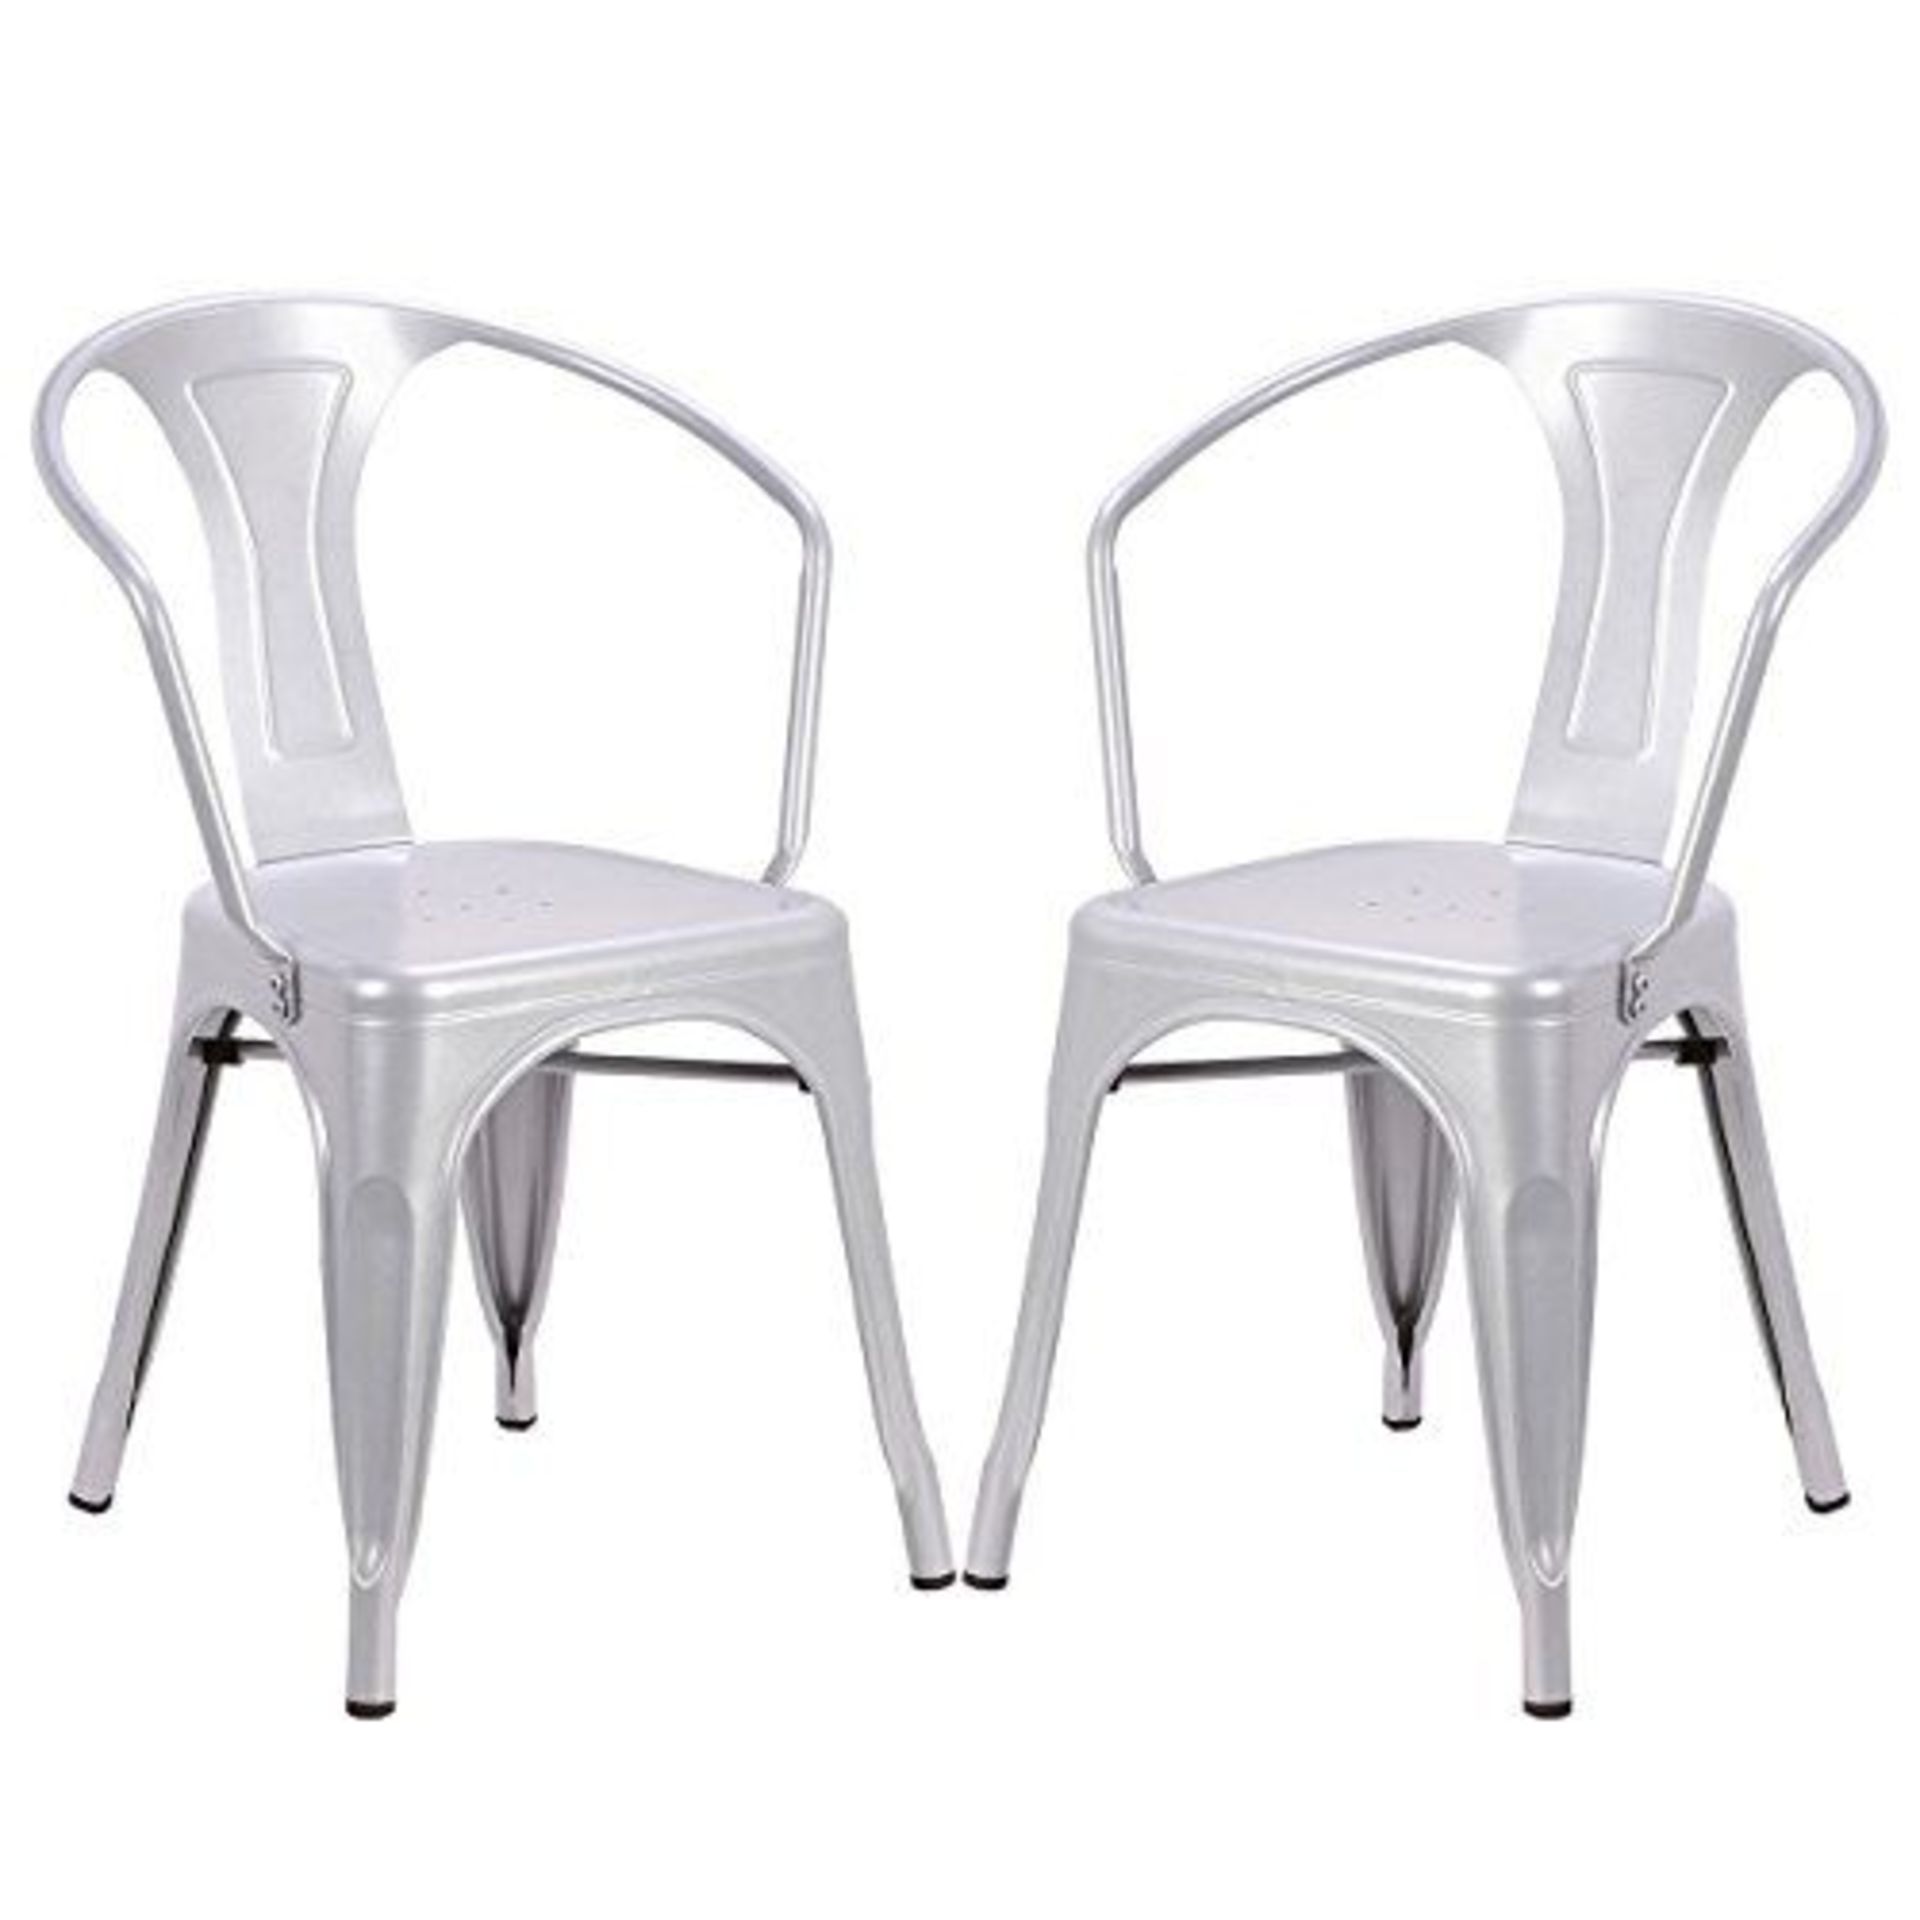 15 x Industrial Tolix Style Stackable Chairs With Armrests - Finish: SILVER - Ideal For Bistros, Pub - Image 3 of 3